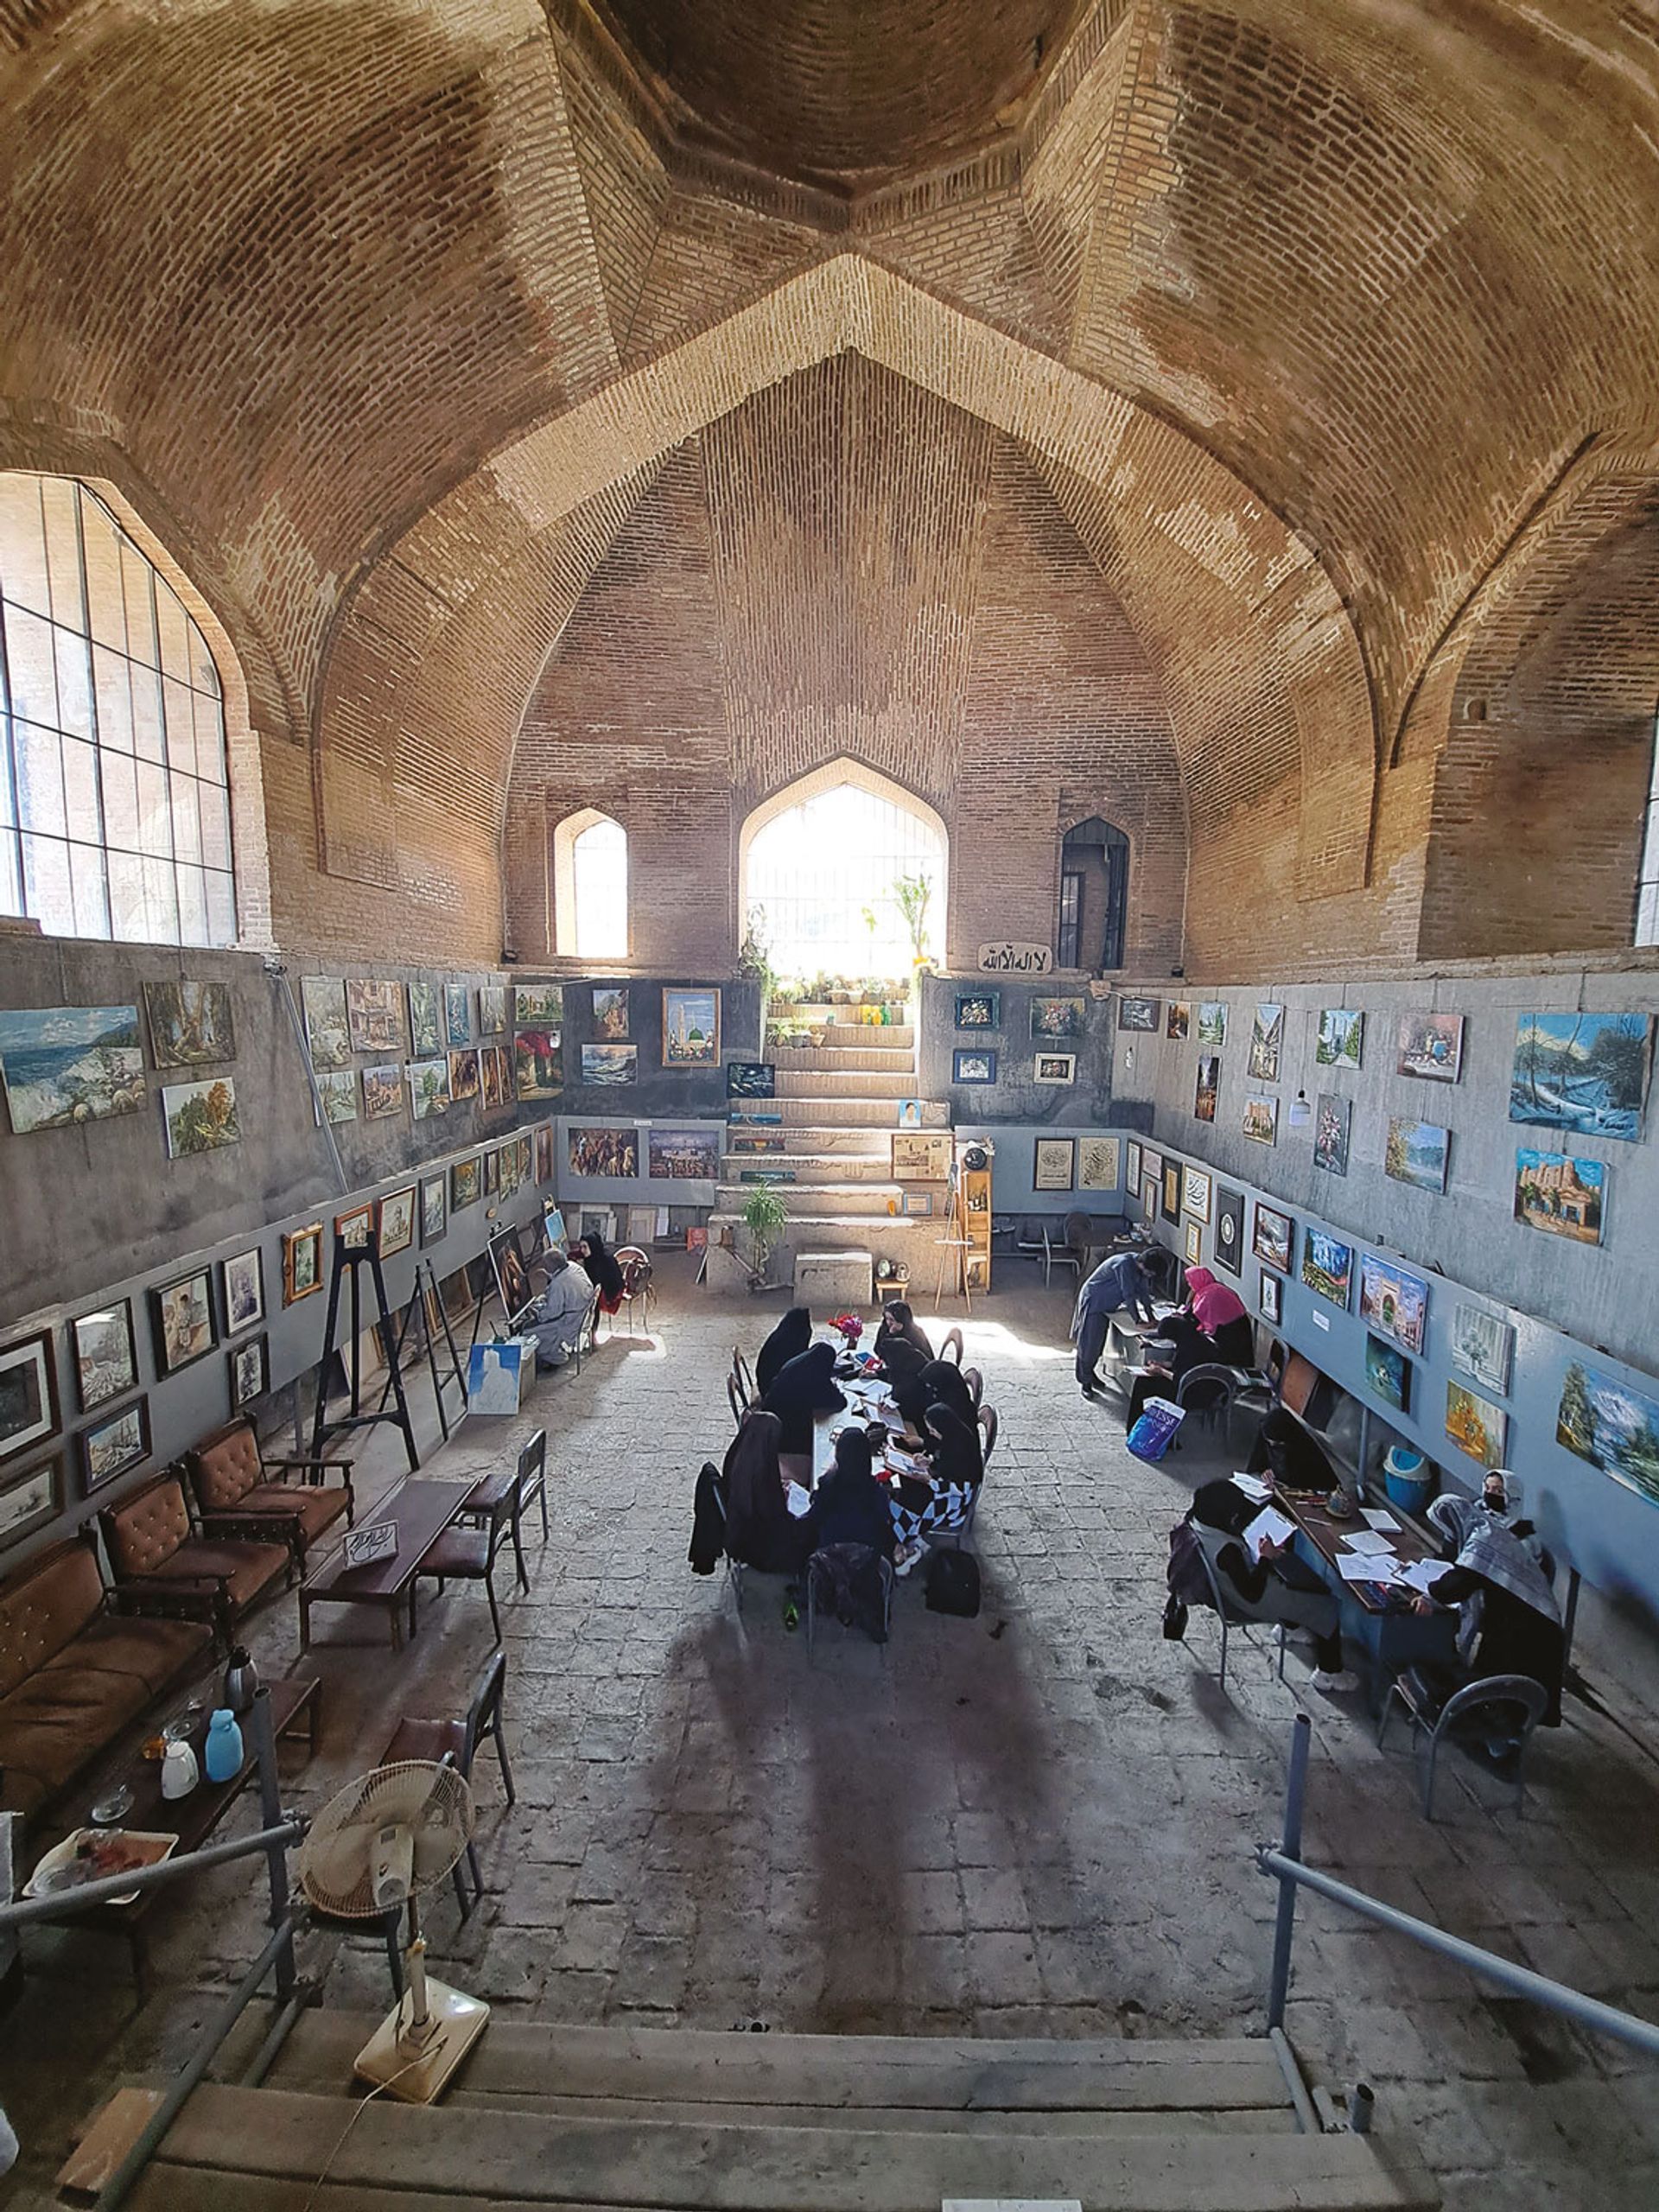 The Malek Cistern in Herat provides an inspiring location for Mohammad Ebrahim Habibi’s art classes. He has yet to receive objections to running classes for women Photo: Sarvy Geranpayeh